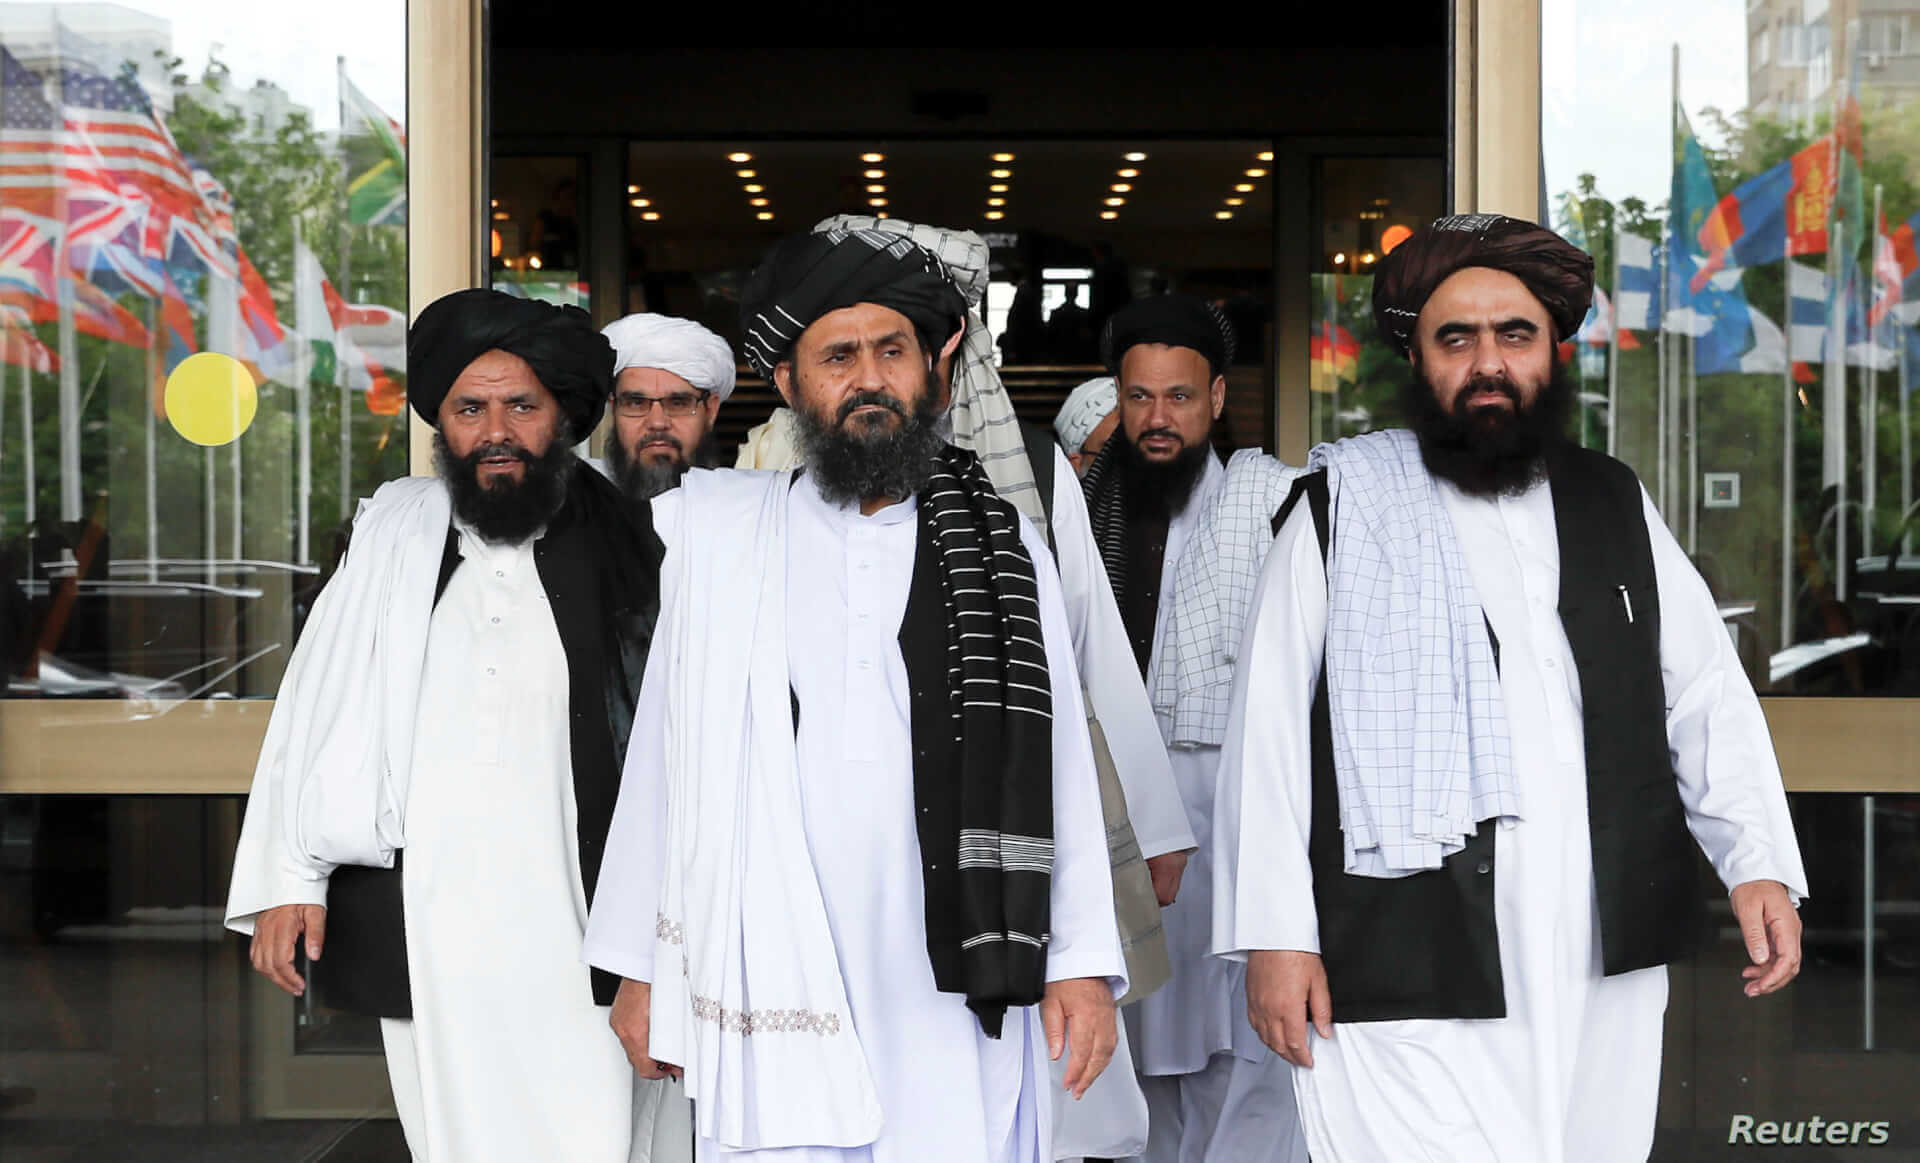 Taliban Warns of “Stern” Response After UNSC Fails to Extend Travel Ban Waiver